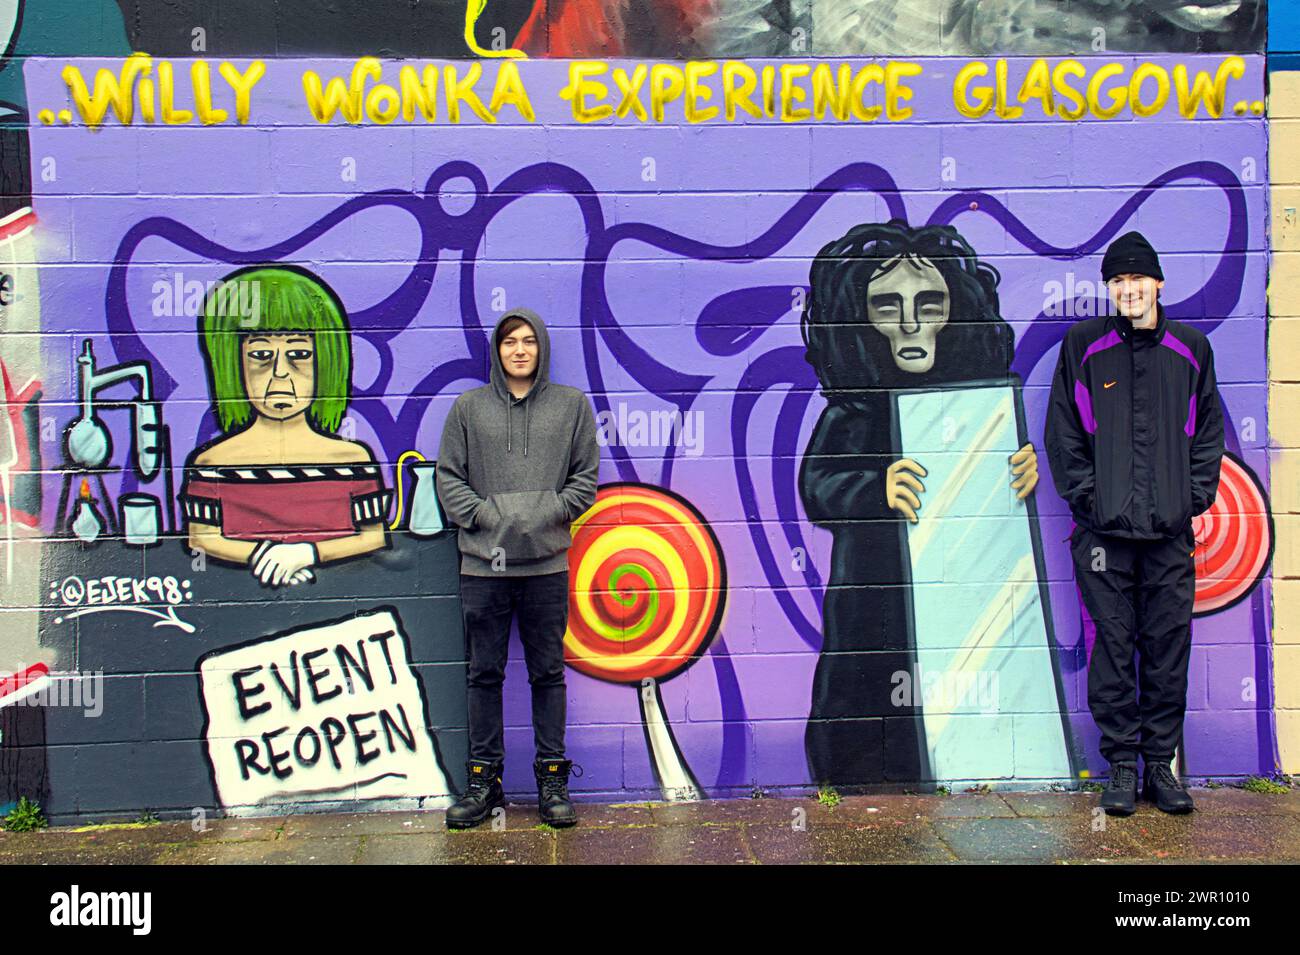 Glasgow, Scotland, UK. 10th March, 2024: Willy’s Chocolate Experience   Fan Kai and his friend descended to the artwork on the banks  of the river clyde. Willy Wonka debacle mural appeared on the clyde side graffiti wall on the clyde walkway. The painting was created by artist Ejek after the  film experience event became national news. The artwork depicts the actresses who worked at the event as an Oompa Loompa and 'The Unknown'from the artificial intelligence script.  Credit Gerard Ferry/Alamy Live News Stock Photo